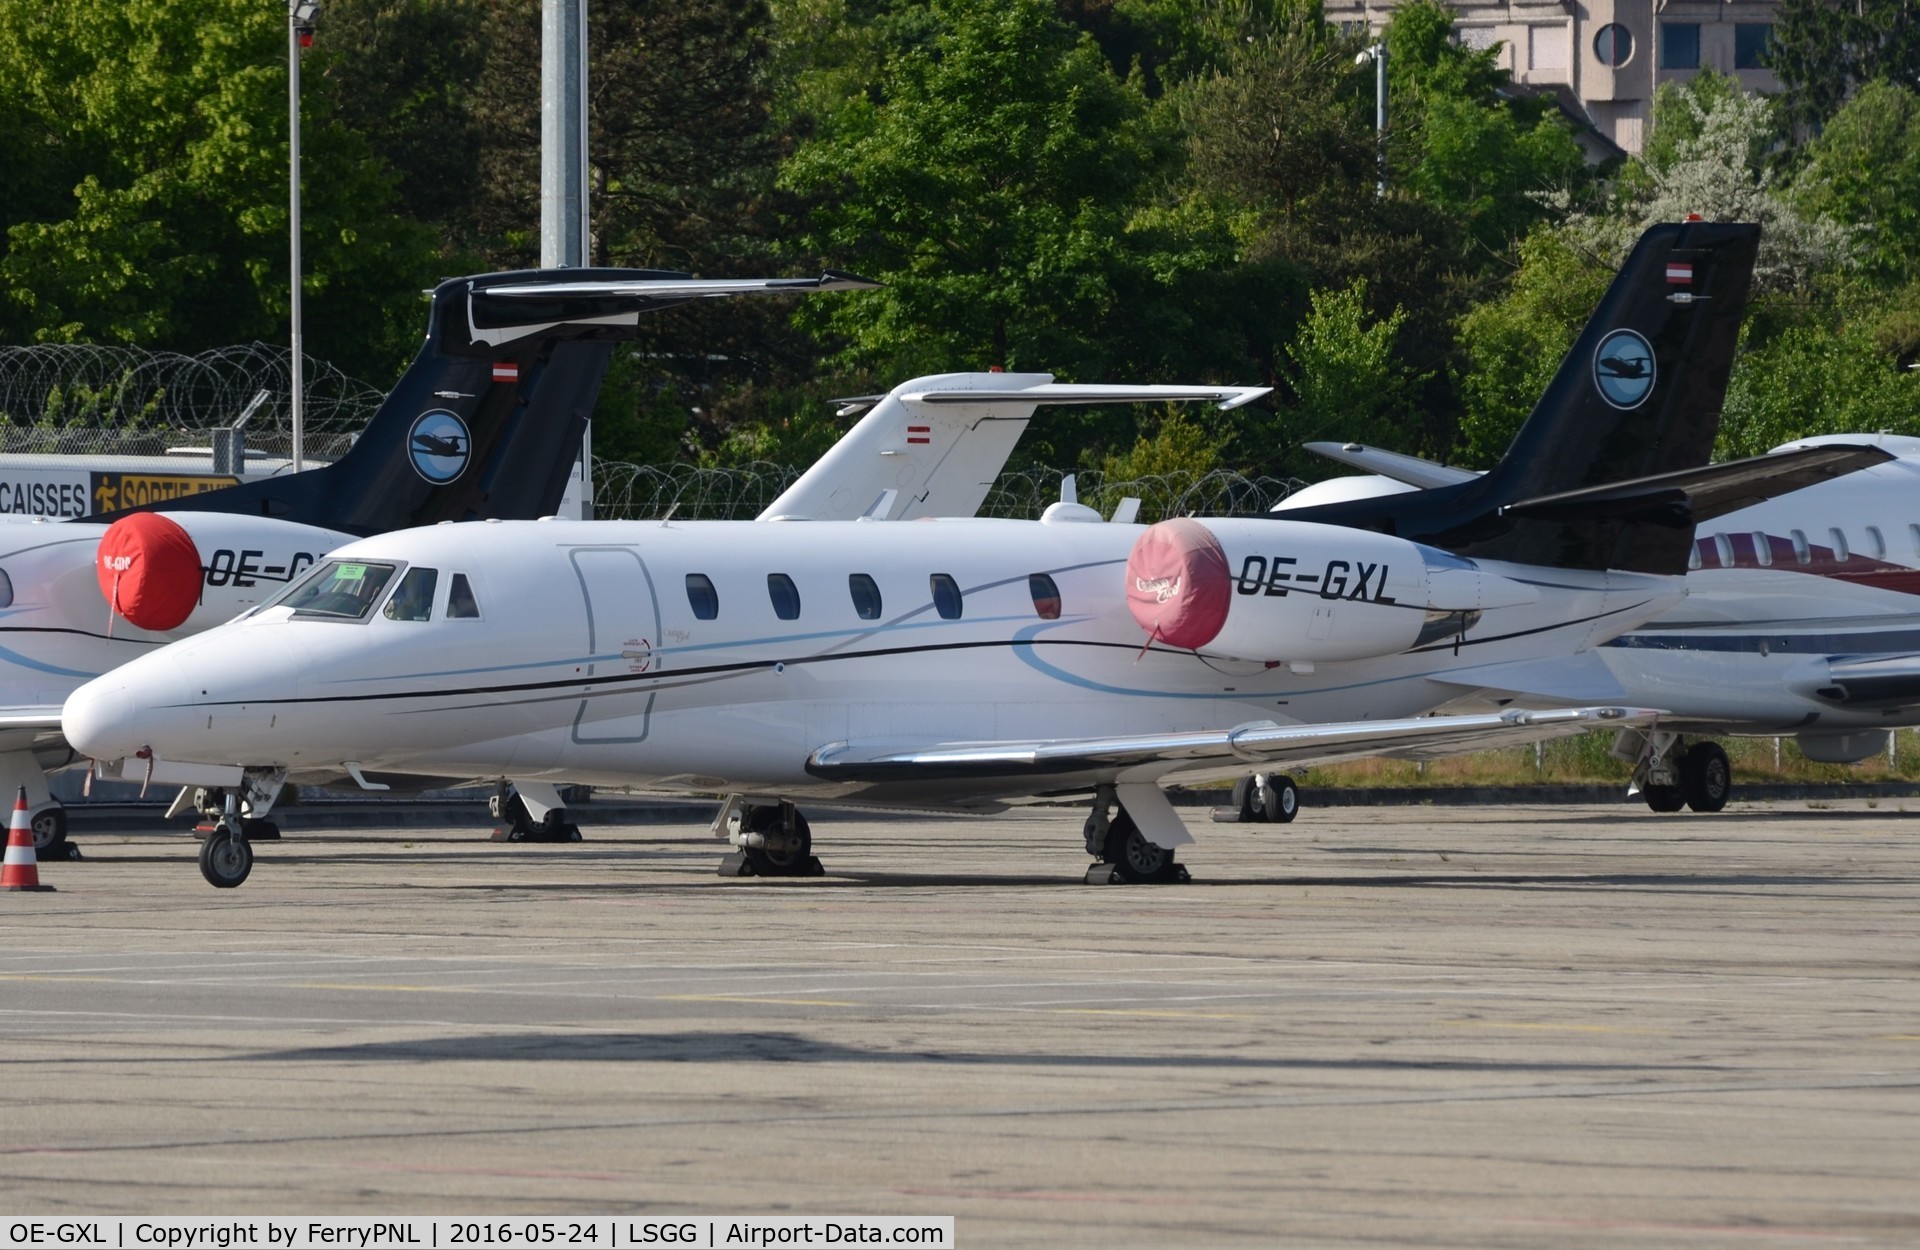 OE-GXL, 2001 Cessna 560XL Citation Excel C/N 560-5154, Excel with shistership Phenom parked next to it in GVA.